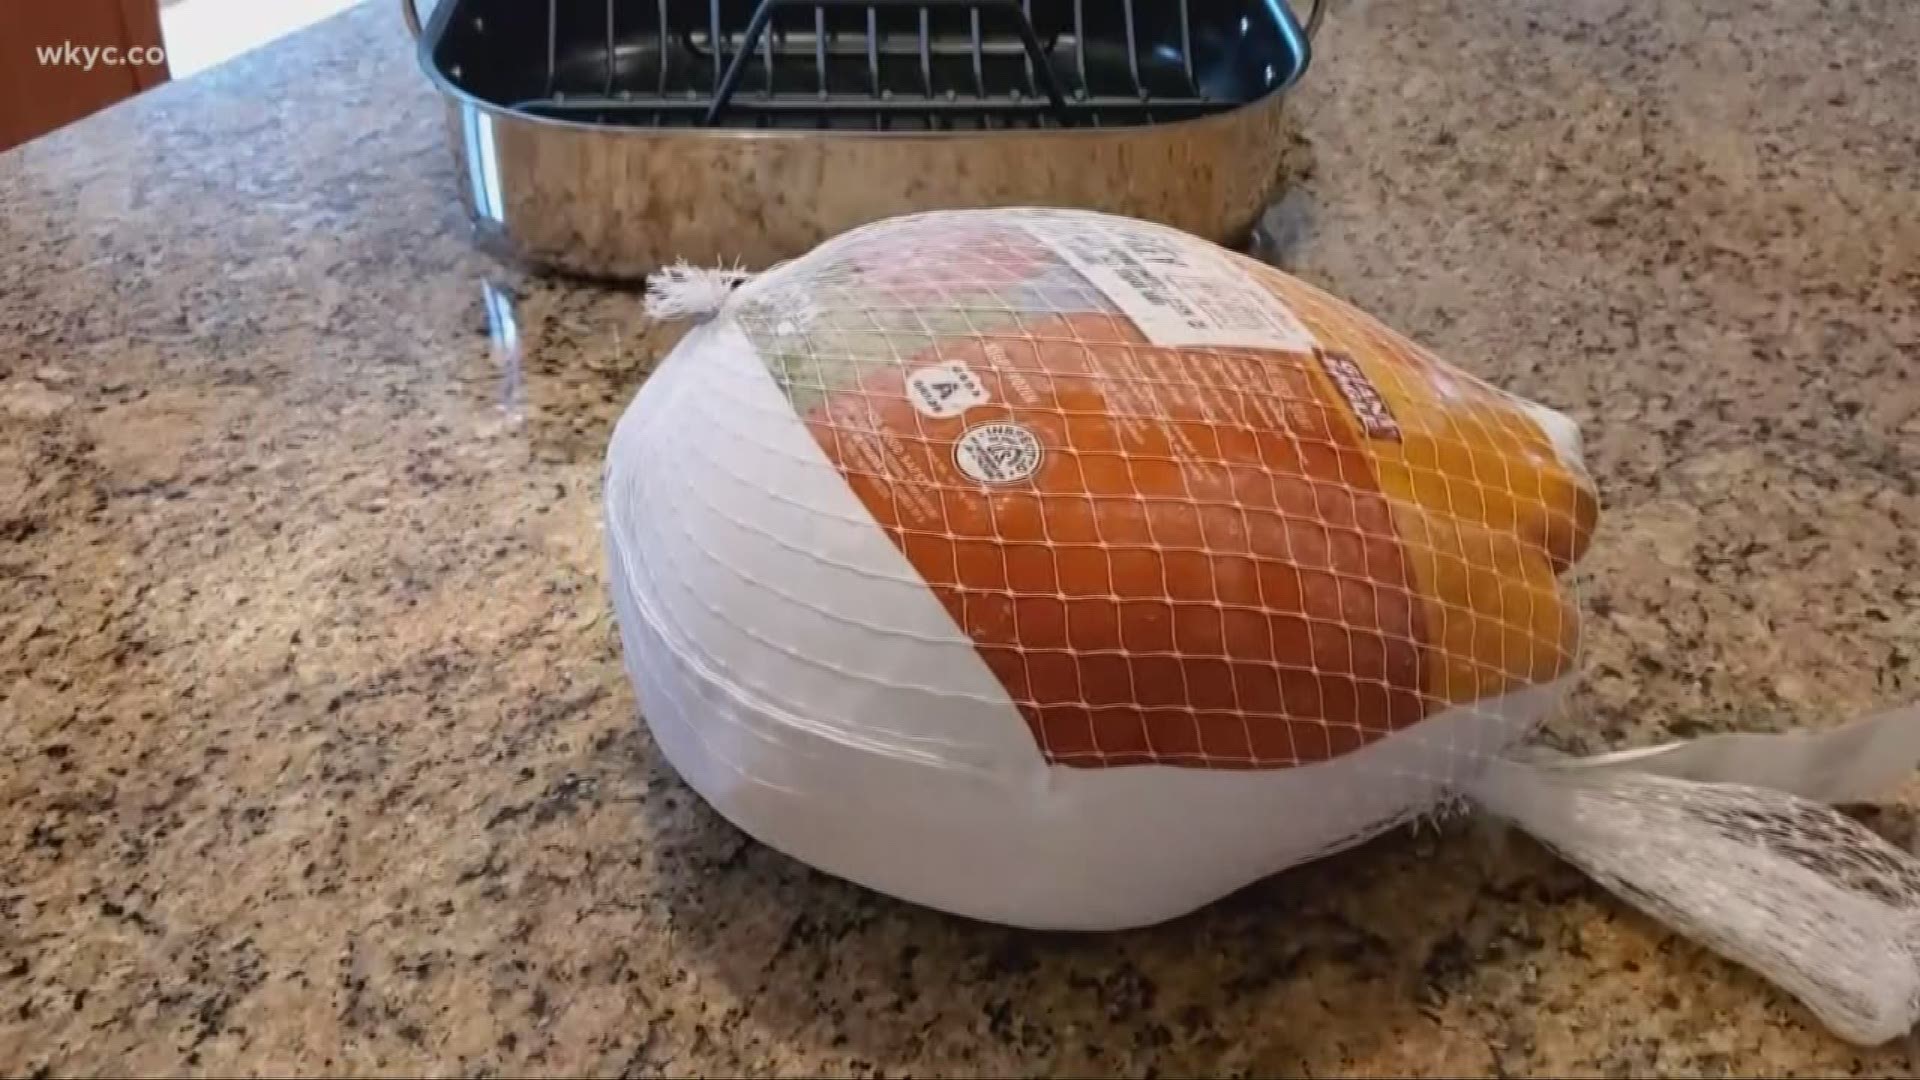 Desperate times call for desperate measures, of course! But can you really cook a still rock-hard frozen turkey?